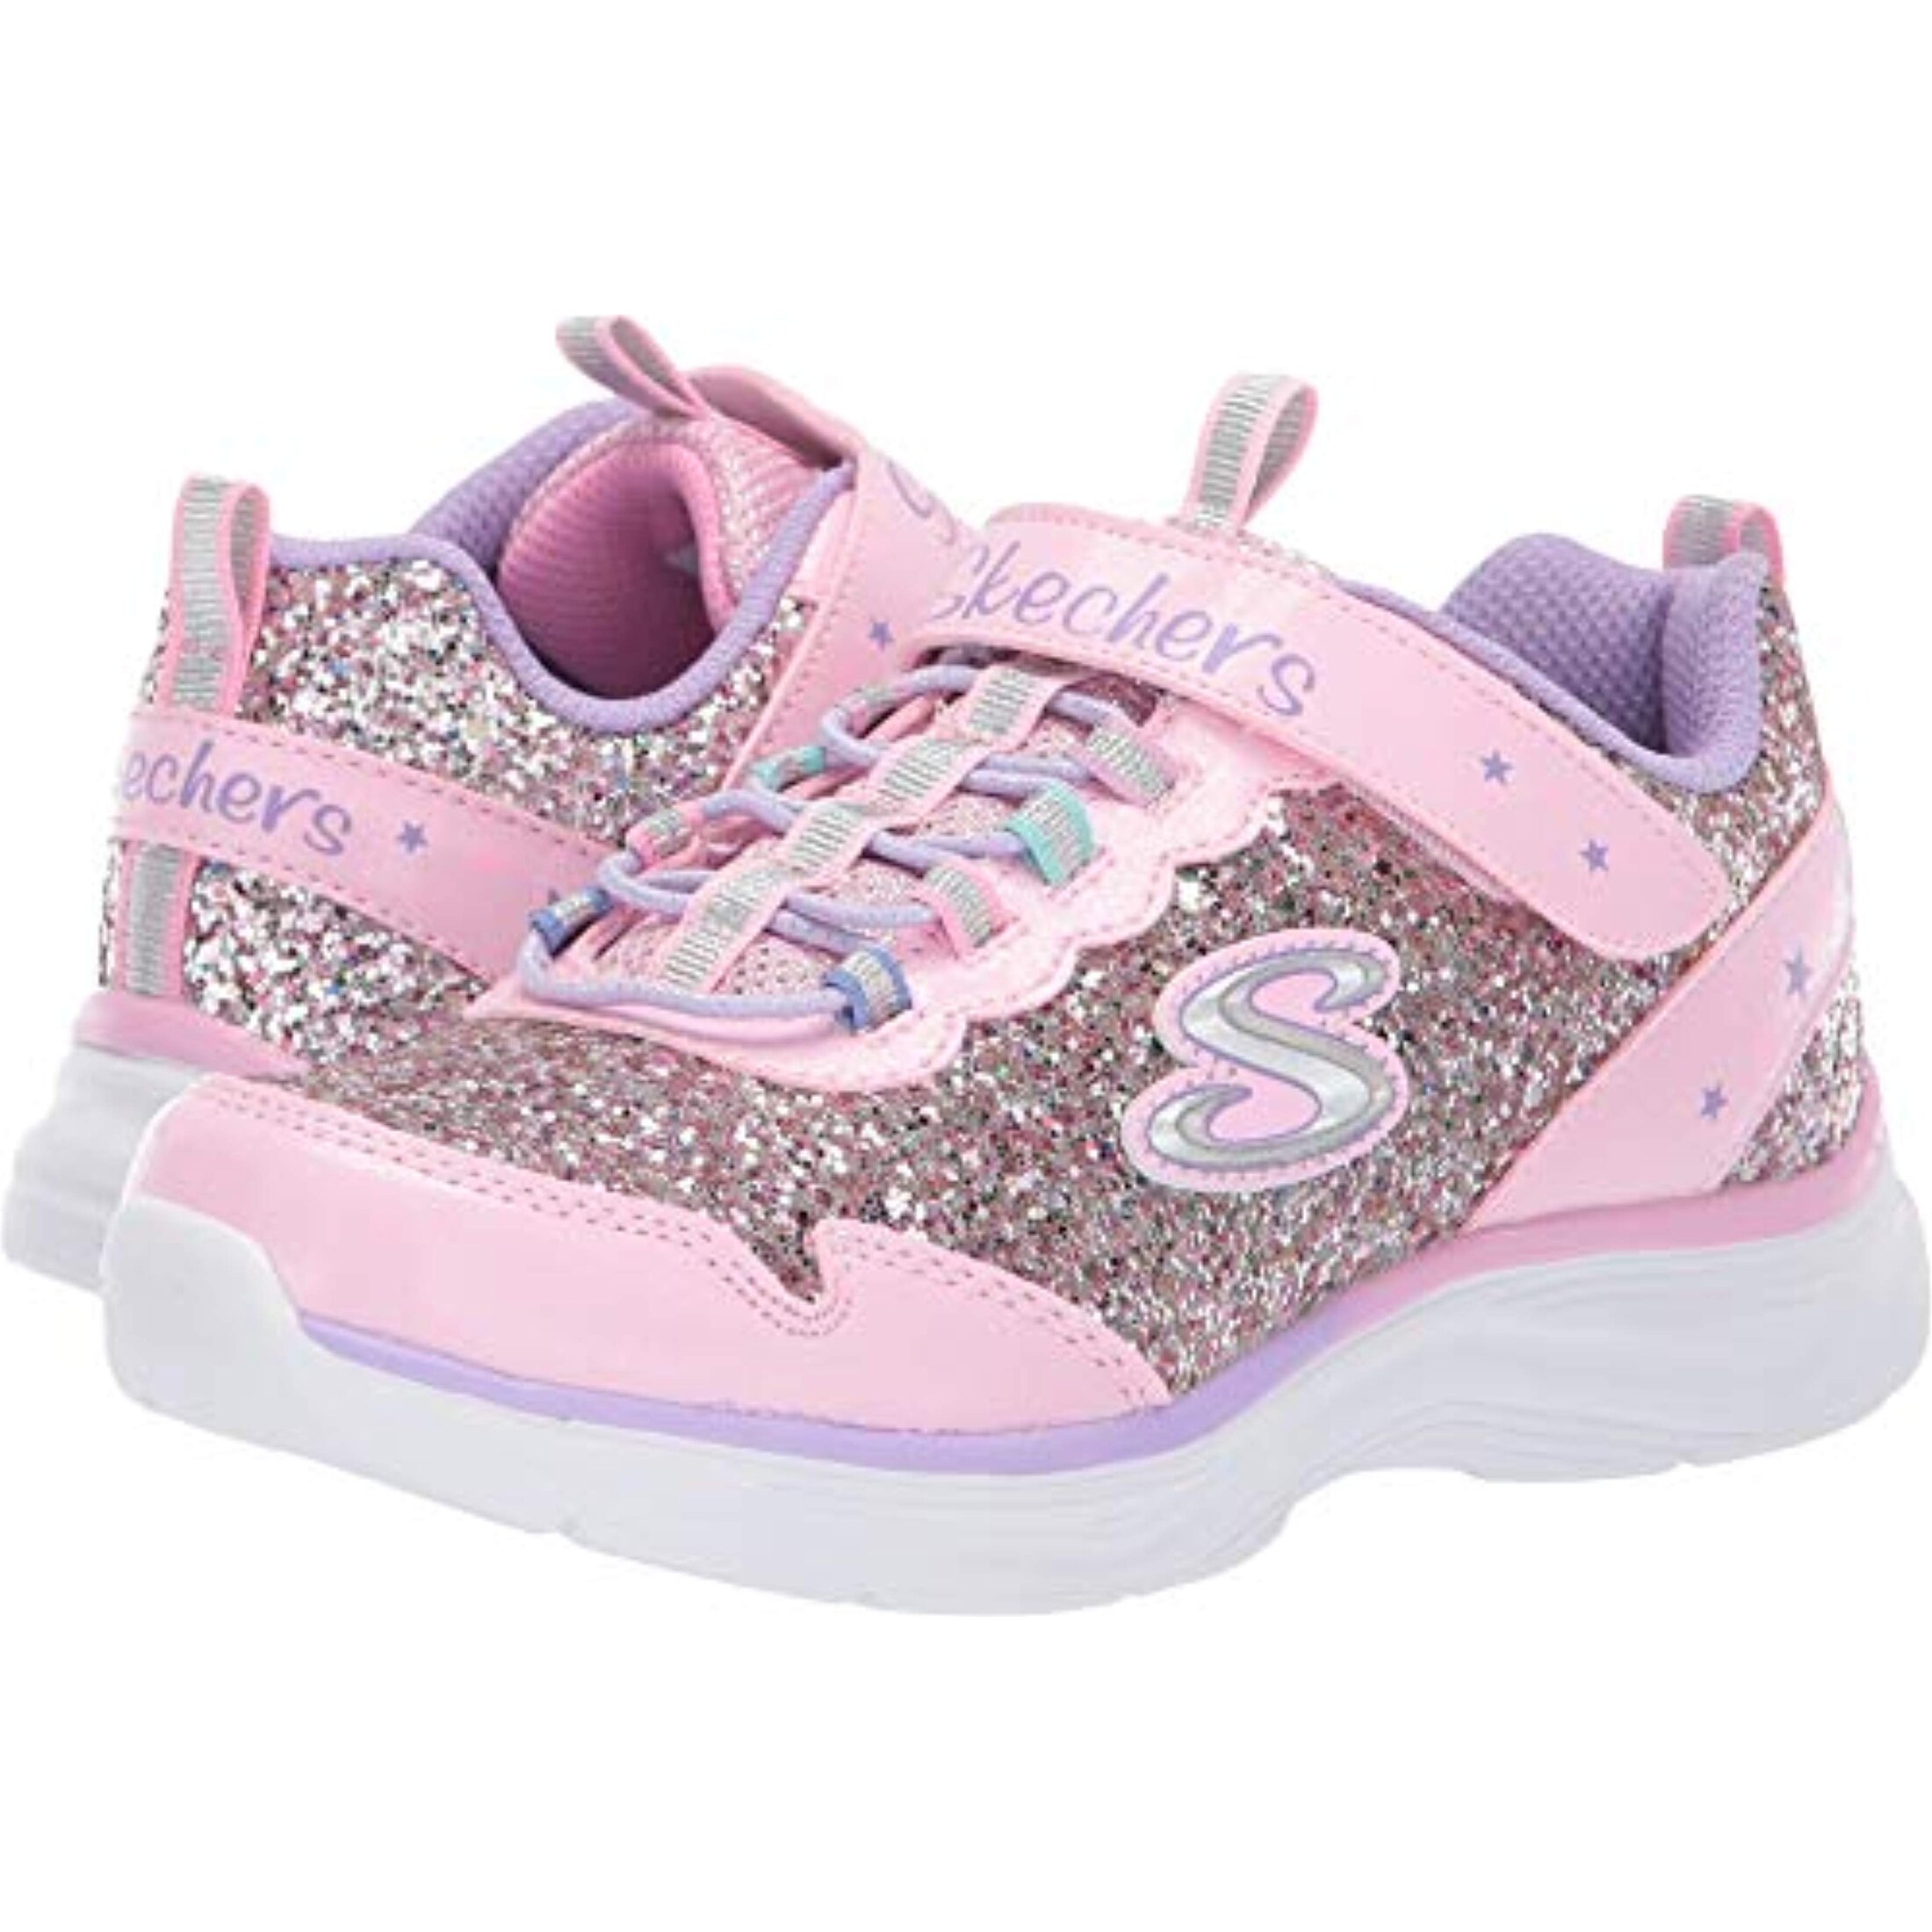 skechers shoes toddlers